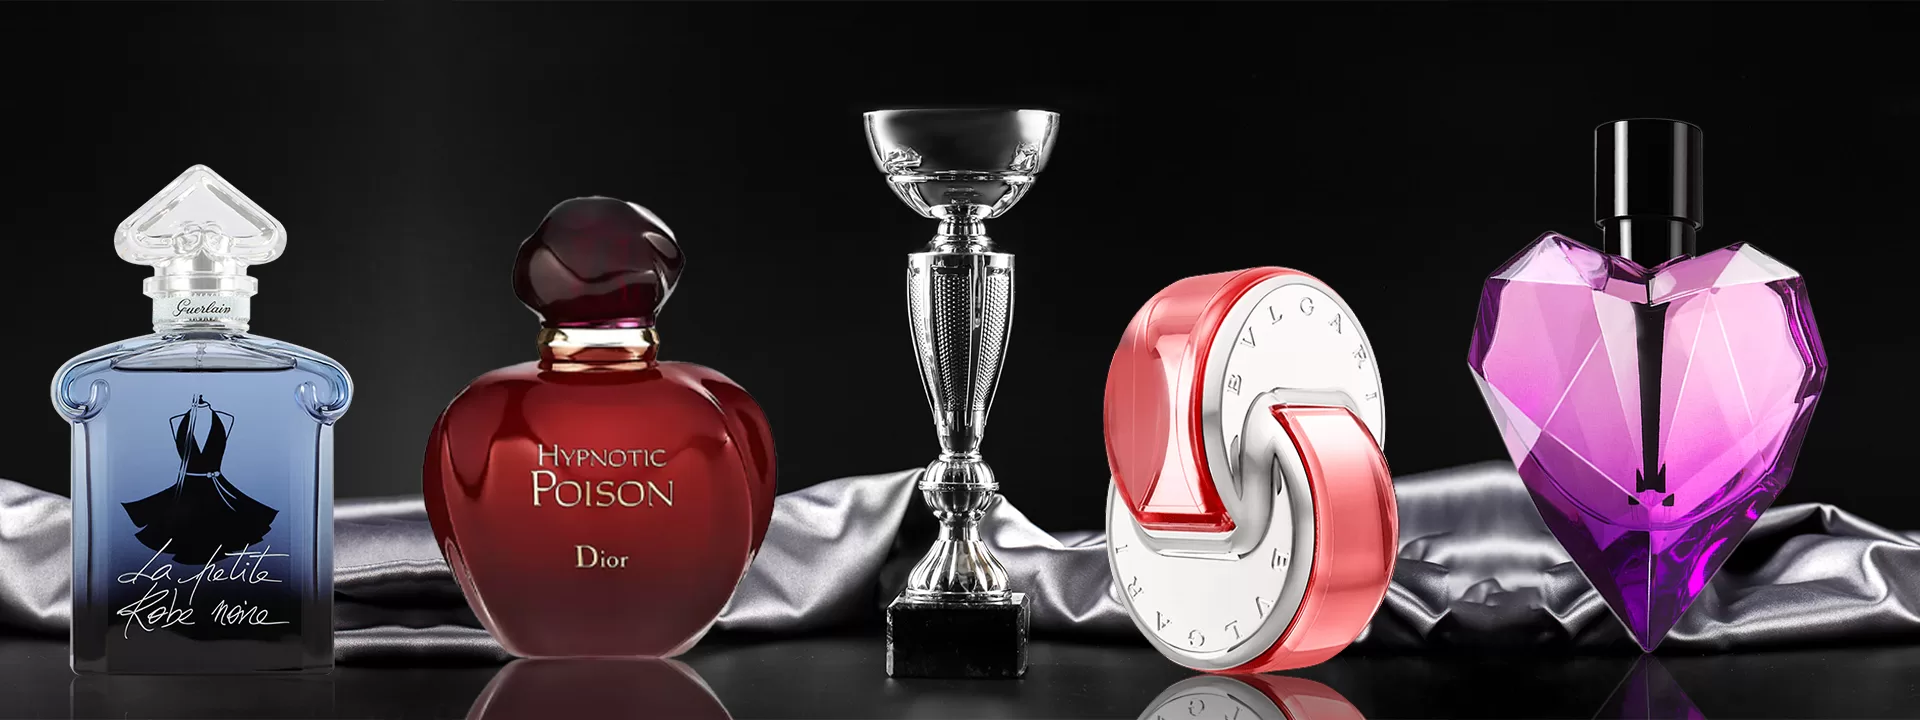 Which fragrance has the best perfume bottle?